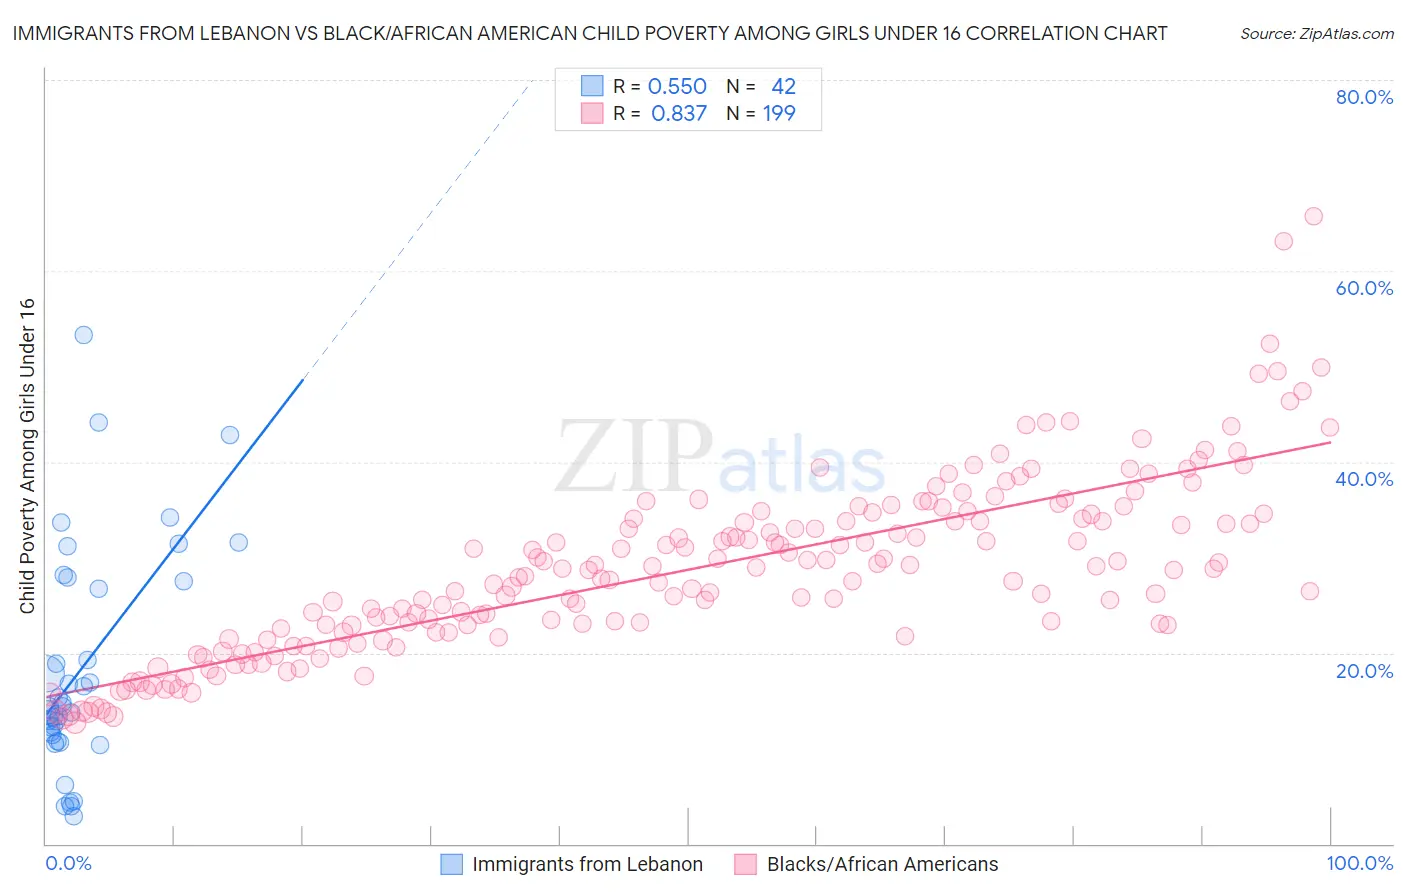 Immigrants from Lebanon vs Black/African American Child Poverty Among Girls Under 16